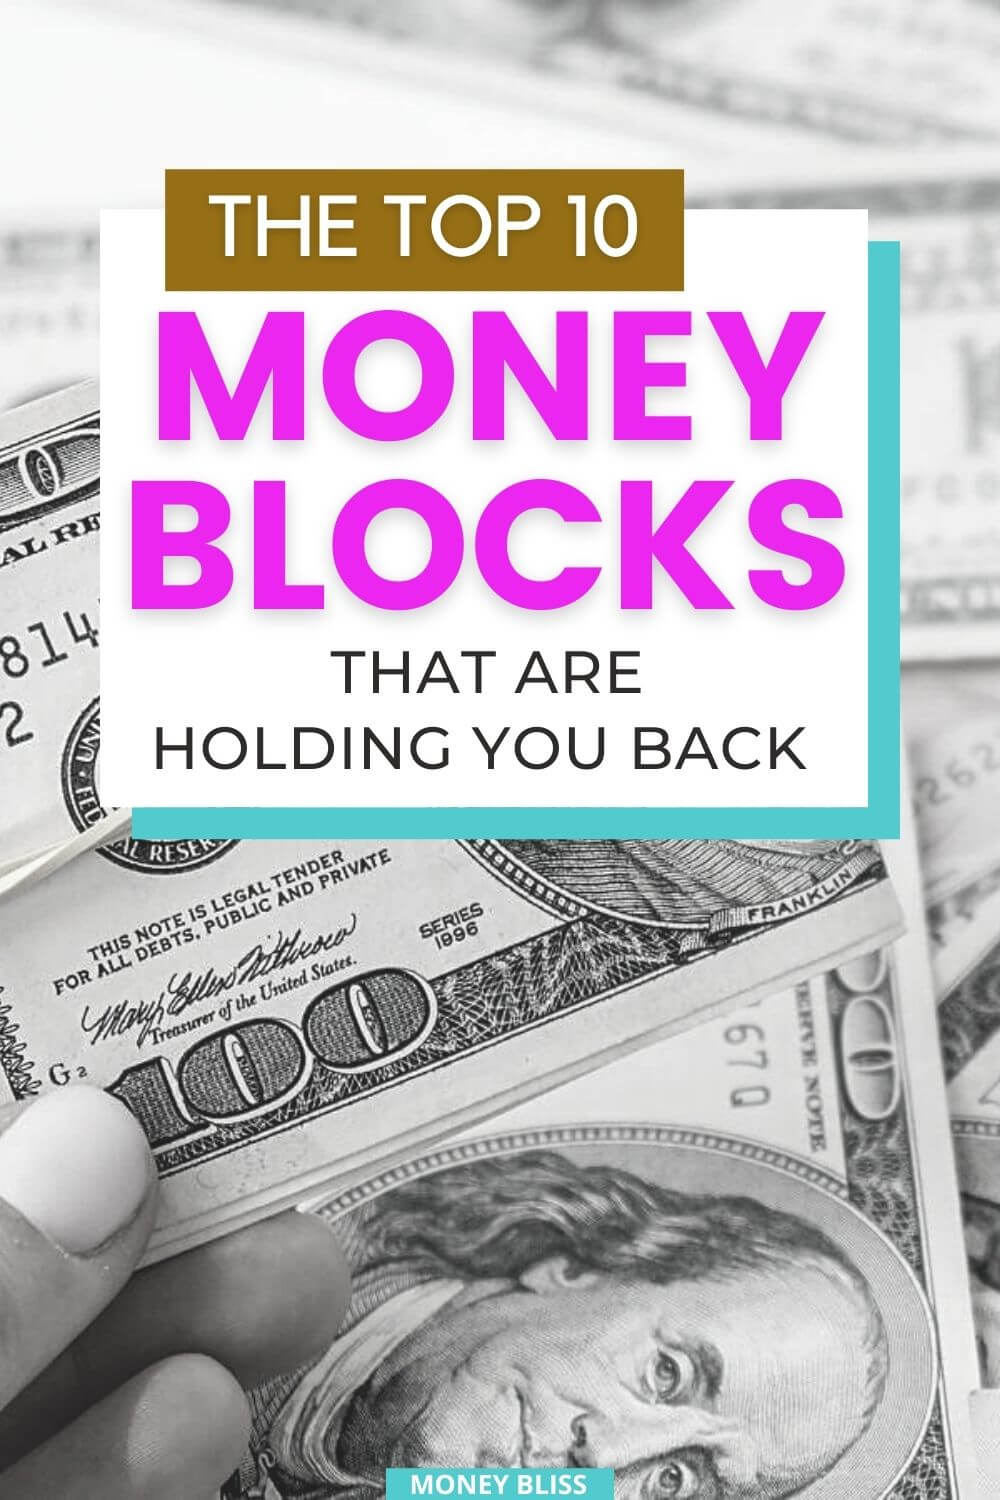 Money blocks are mental obstacles that keep people from achieving financial abundance. Learn how to remove money blocks and live the life you want.